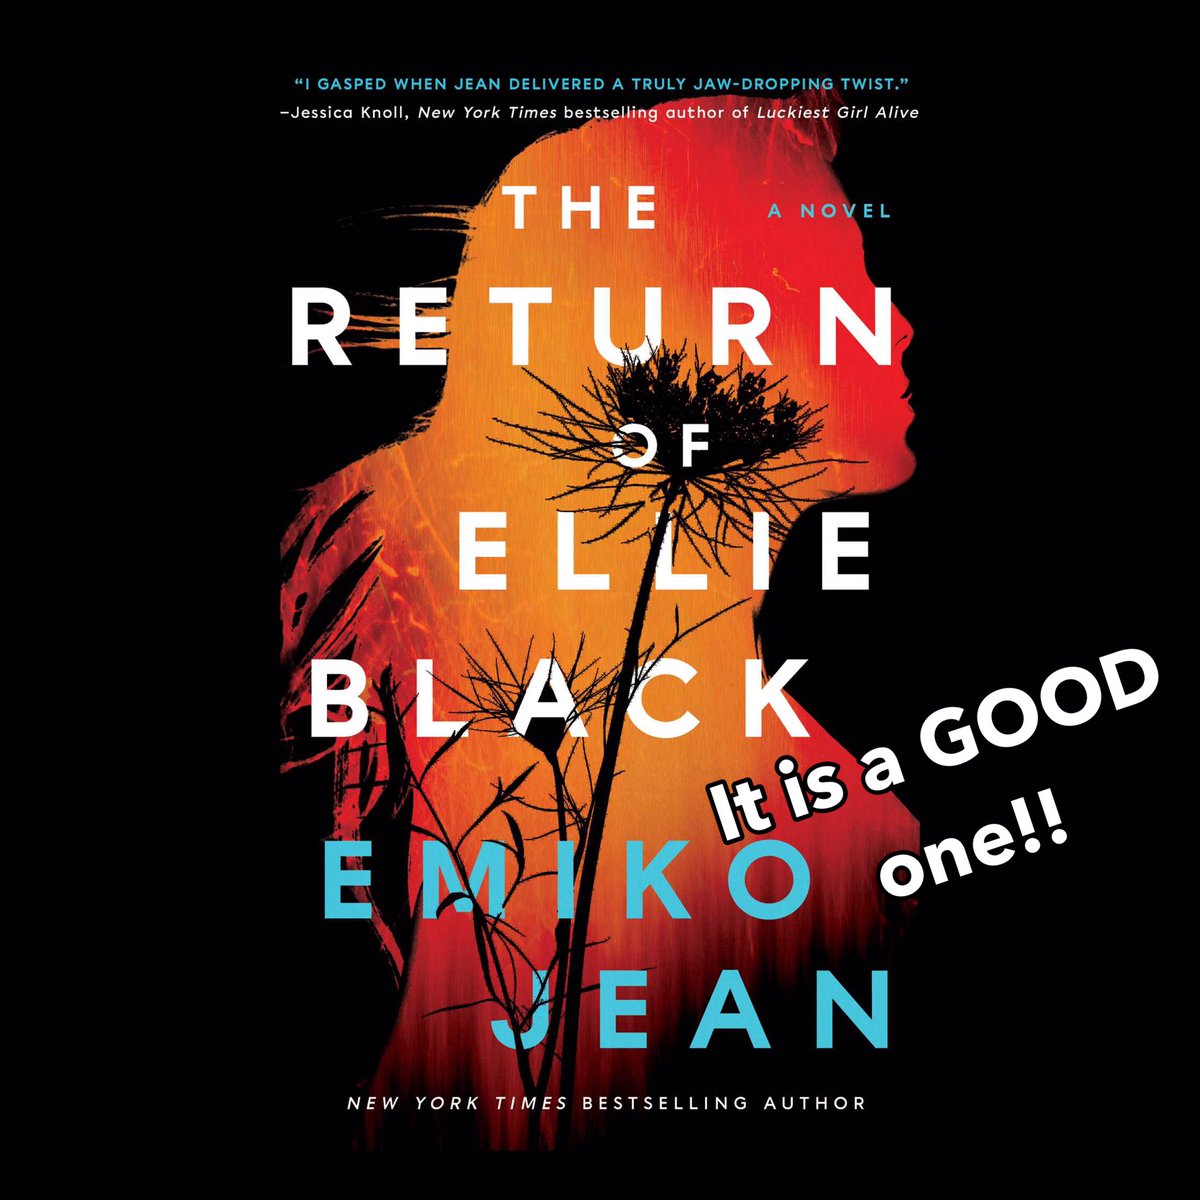 When Ellie black came back after being missing for two years she shocked everyone and wouldn’t tell anyone where she was.

Intense, has disturbing scenes, and some jaw-dropping surprises.

tinyurl.com/bdexw9f5

Emiko Jean
@simonandschuster